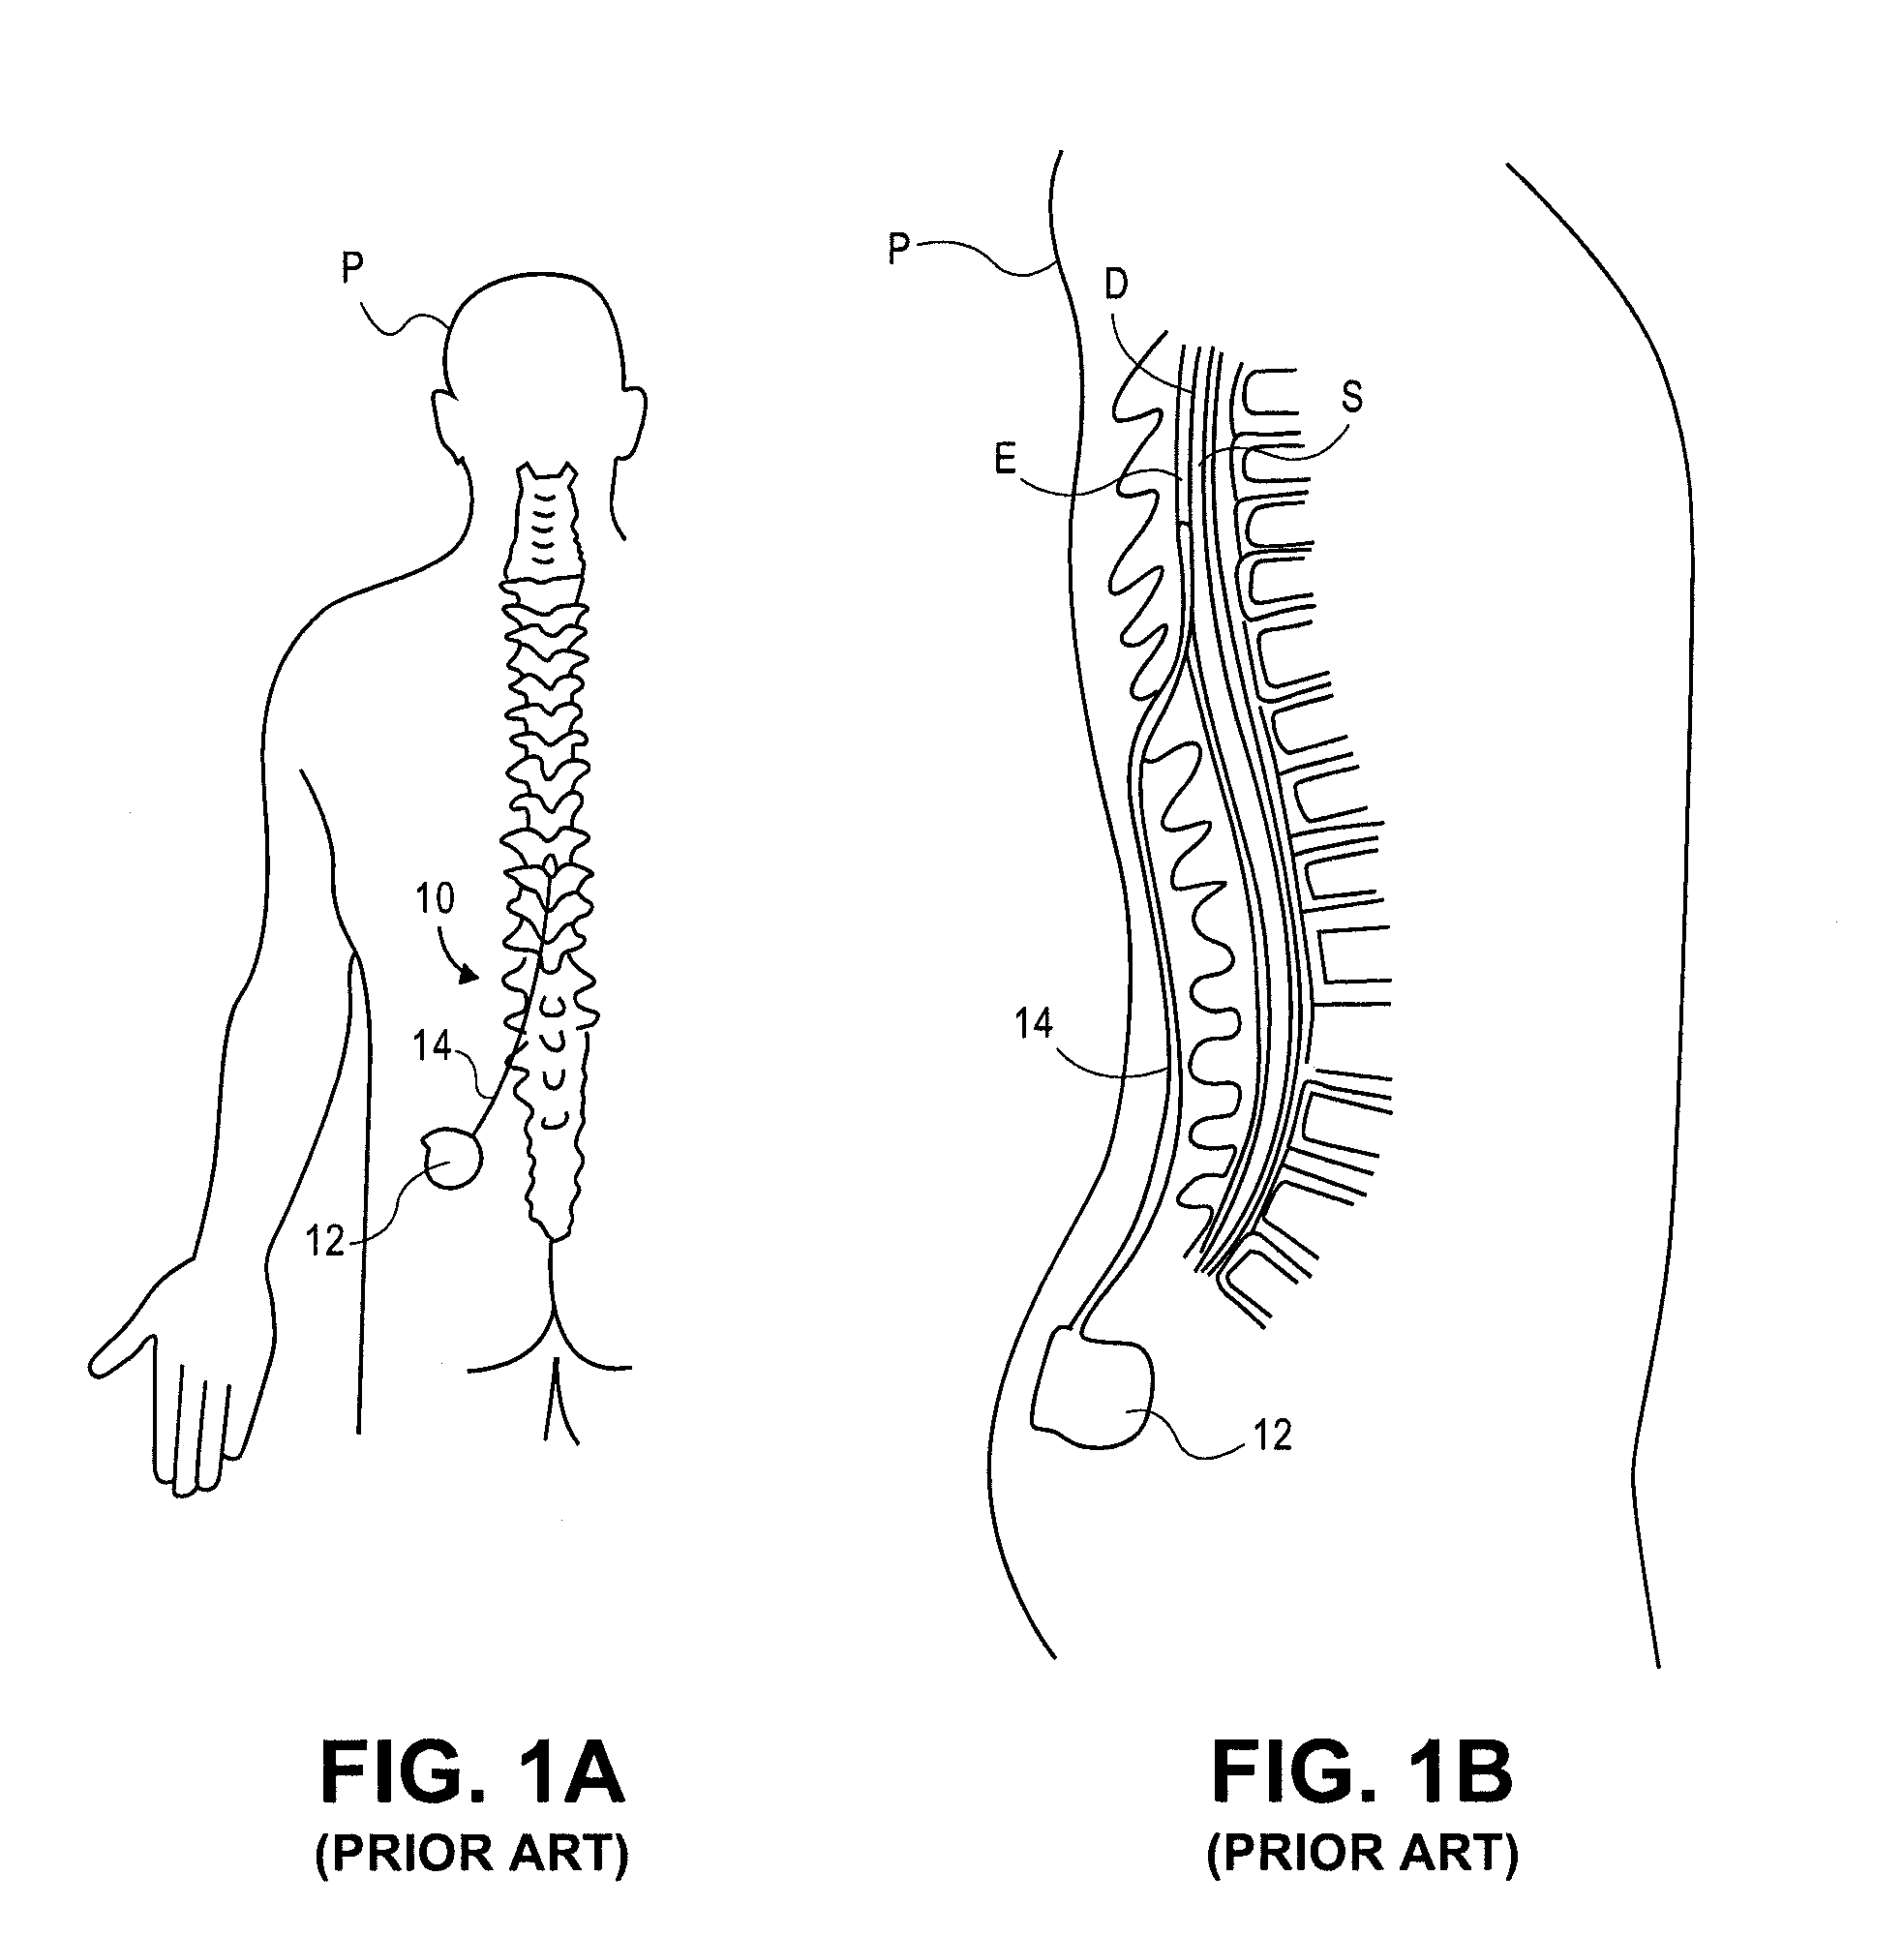 Grouped leads for spinal stimulation